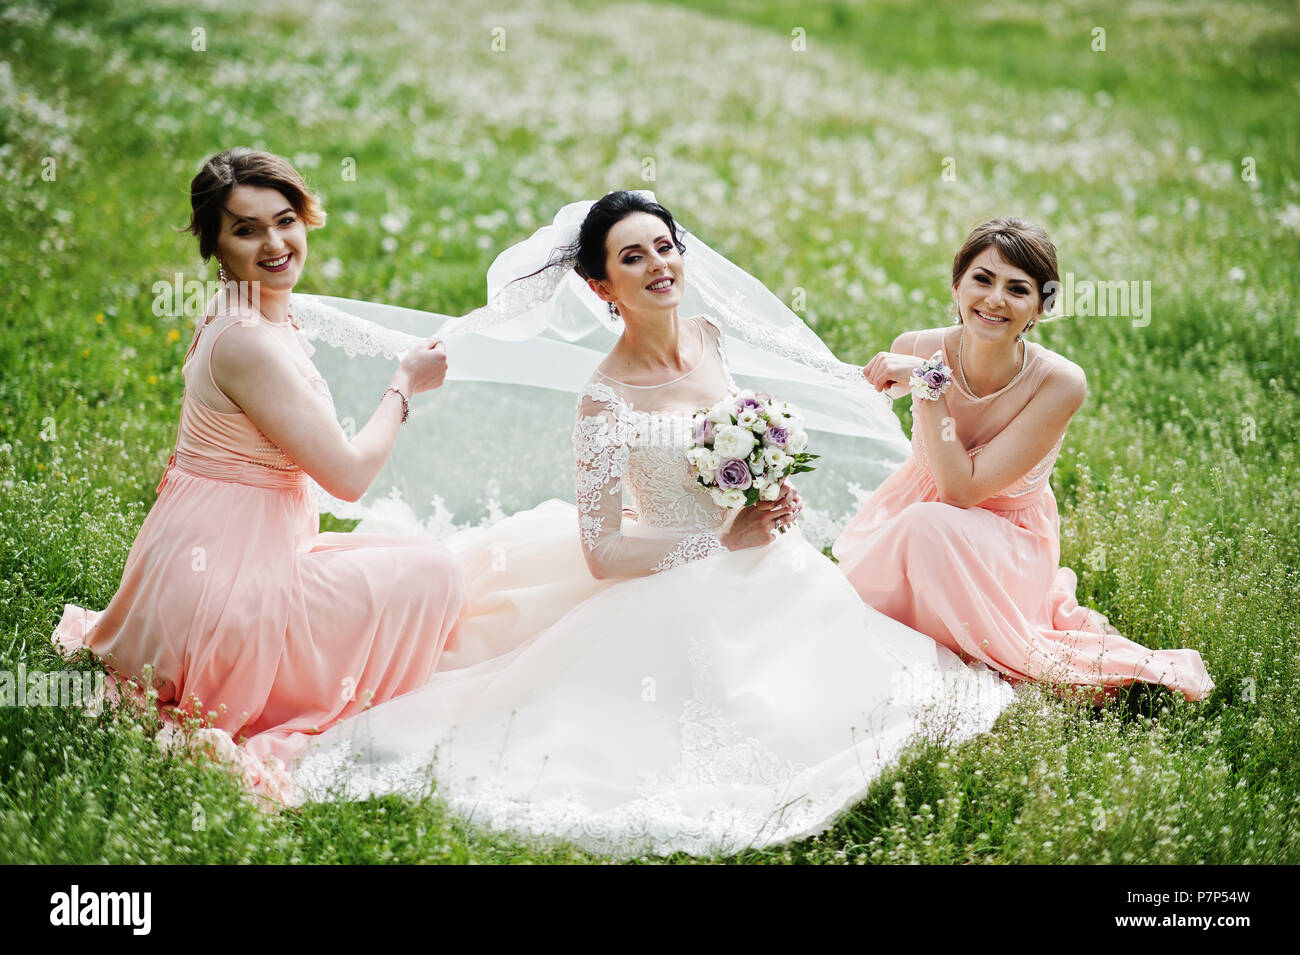 Trending Bridesmaid Poses & Reel Ideas you will love to try!